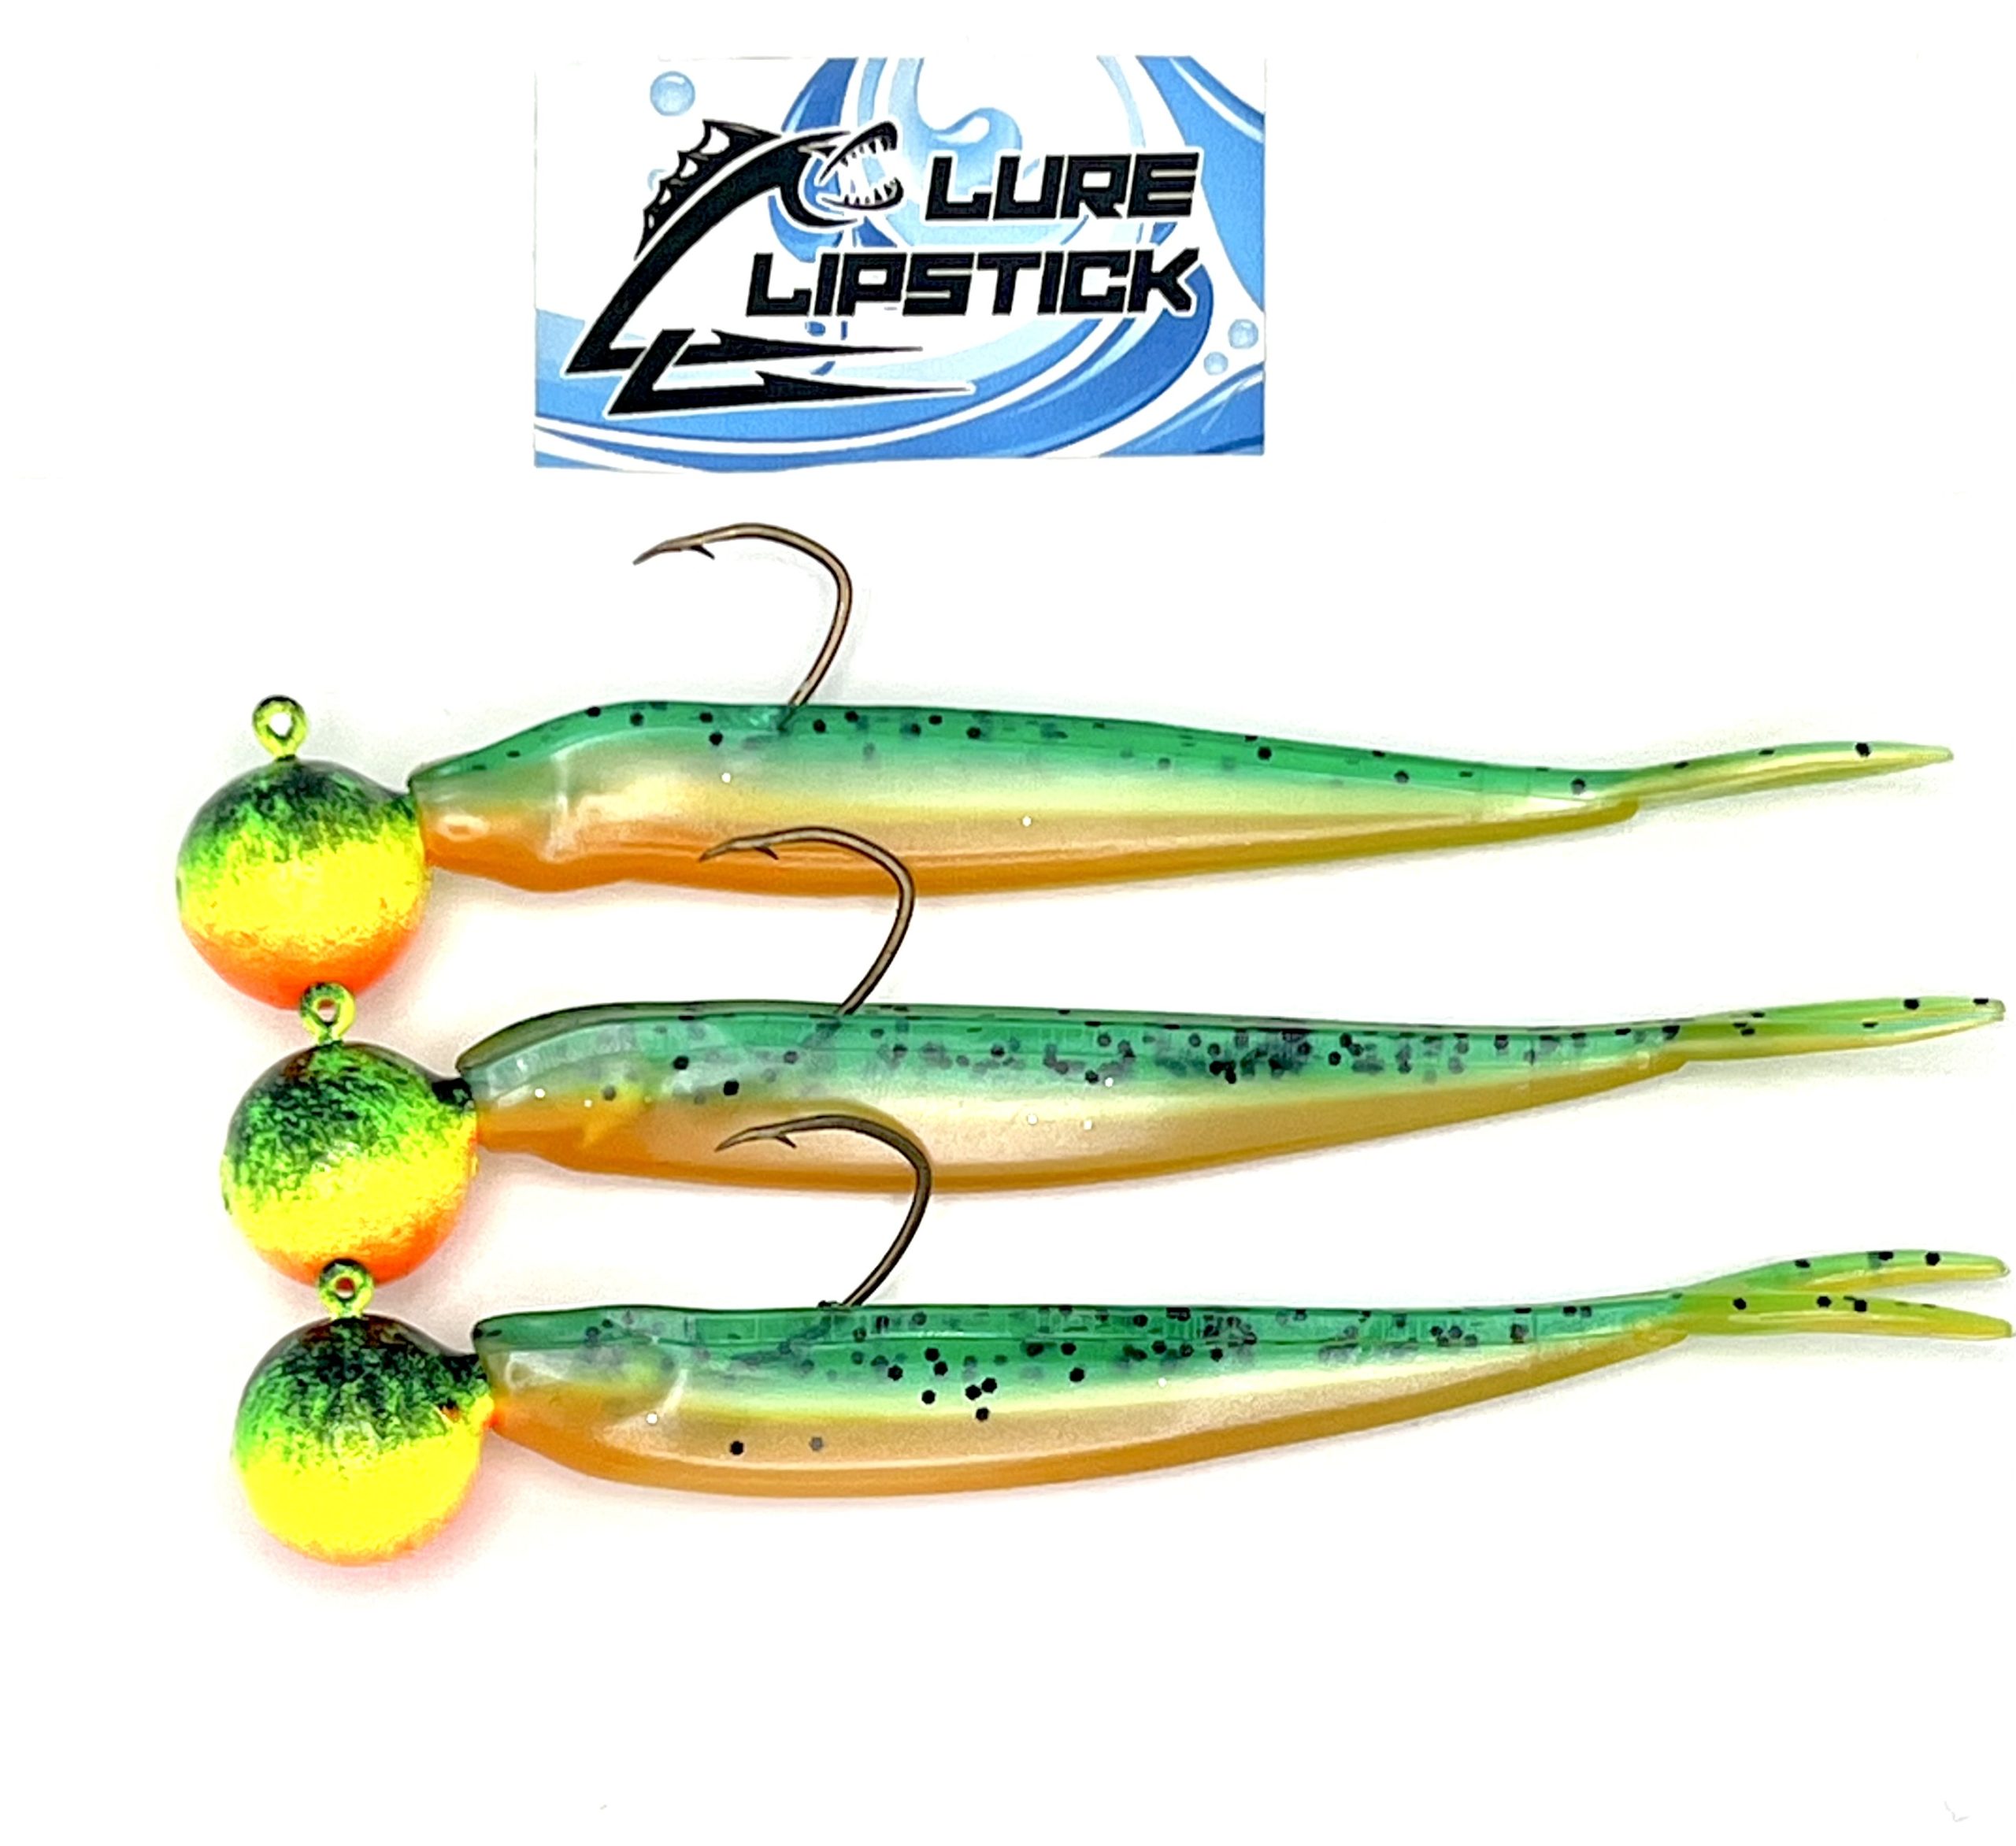 Walleye Ready Rigs- 3 Pack - Fire Tiger